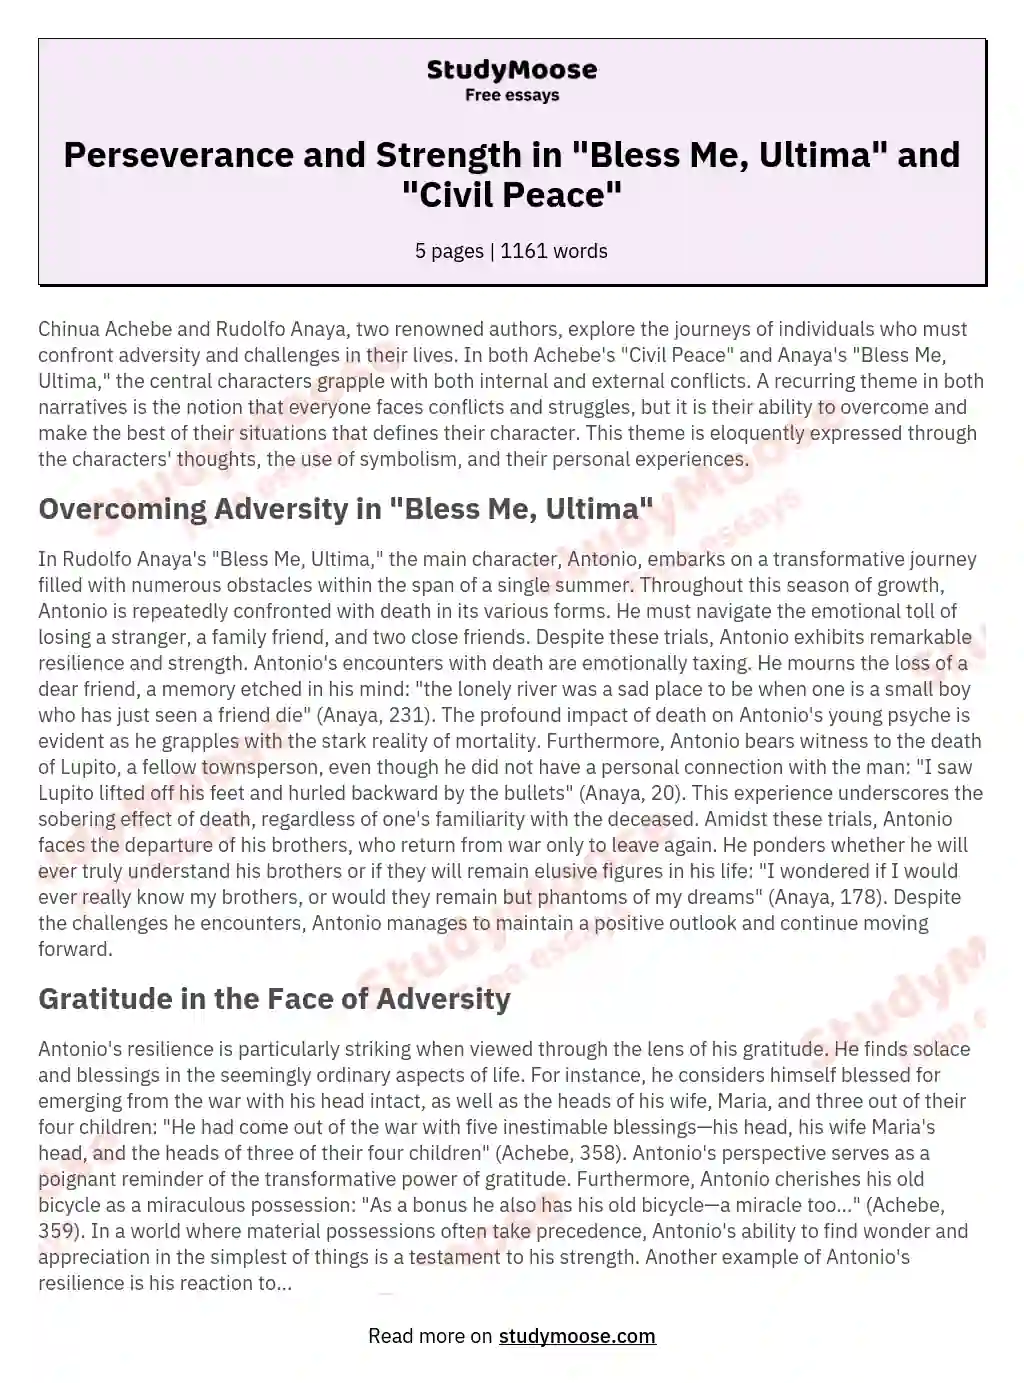 Perseverance and Strength in "Bless Me, Ultima" and "Civil Peace" essay